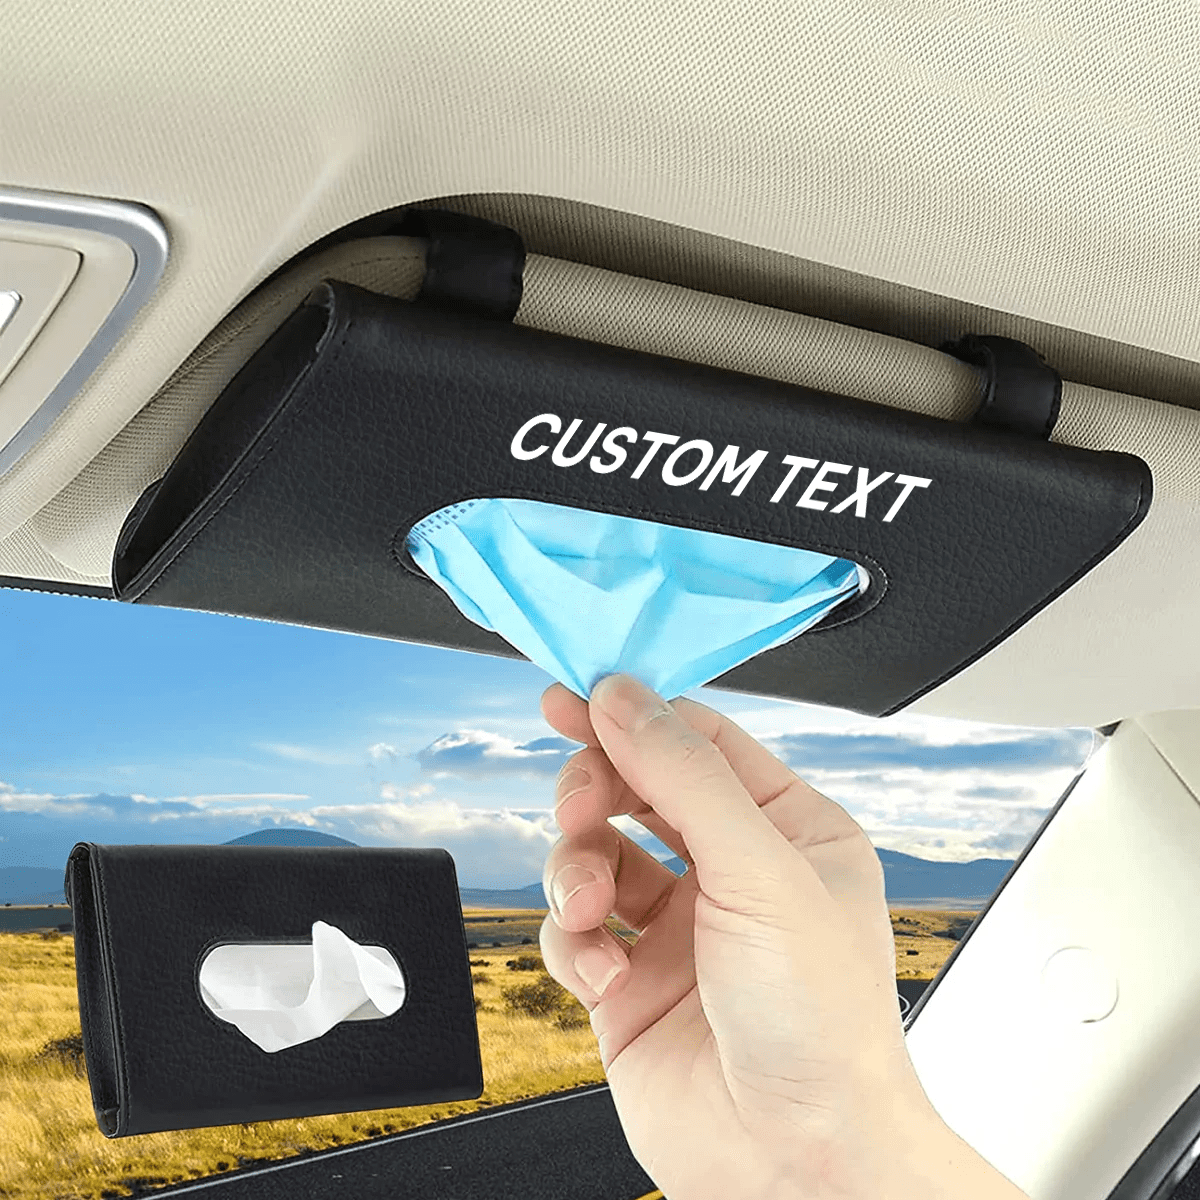 Custom Text and Logo Car Tissue Holder, Fit with all car, Car Visor Tissue Holder, Sun Visor Mask Box, Car Tuning Accessories - Delicate Leather